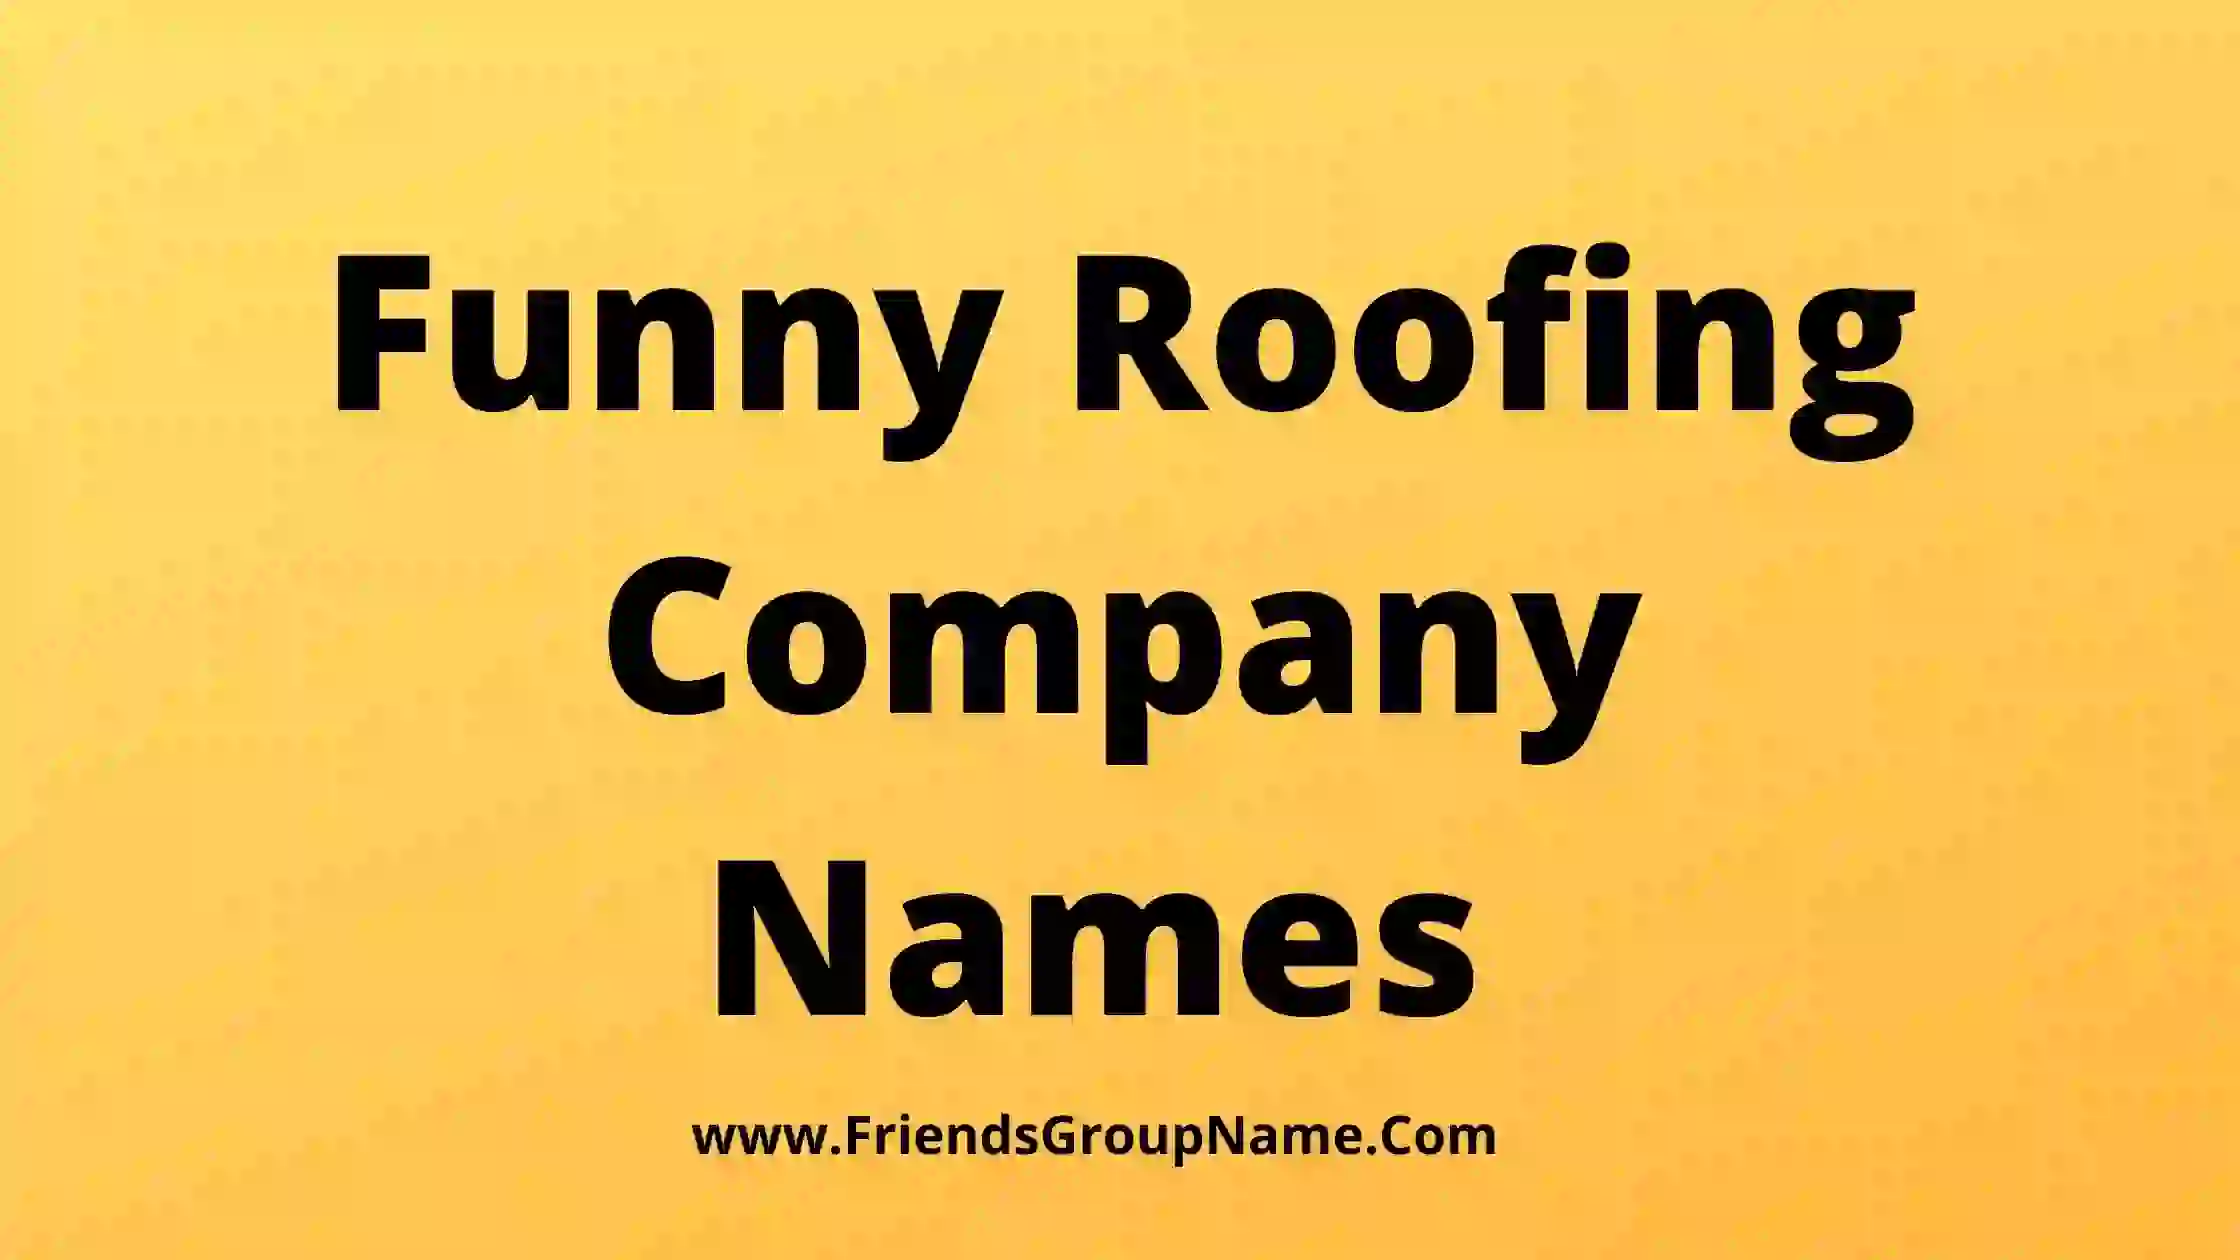 Funny Roofing Company Names